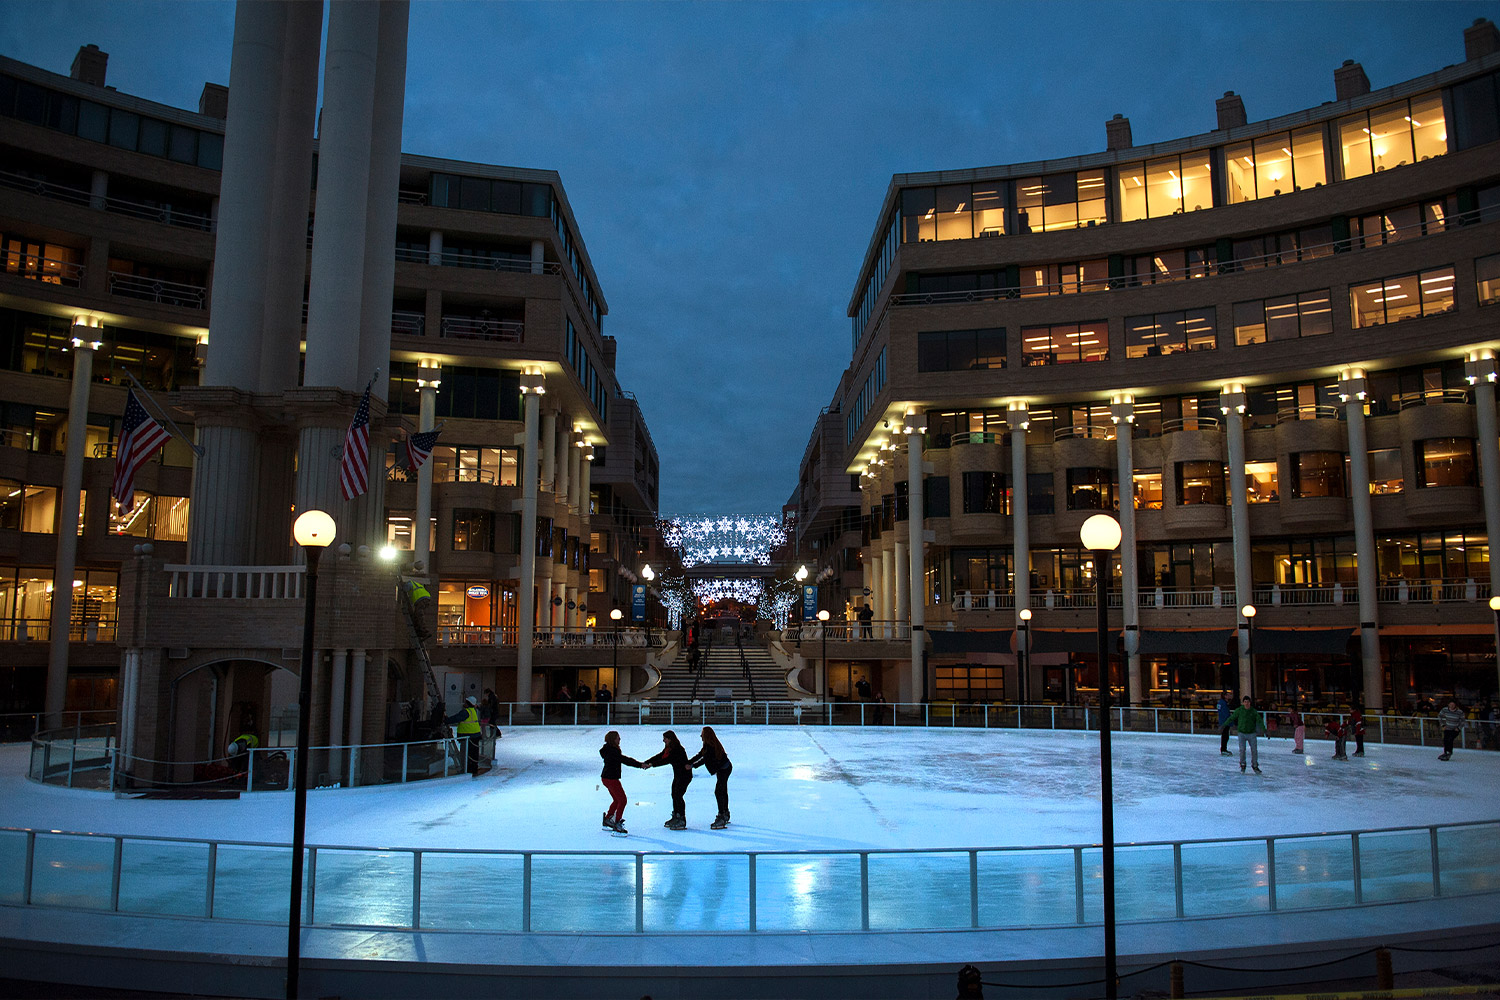 People skating on an ice rink between two buildings at night